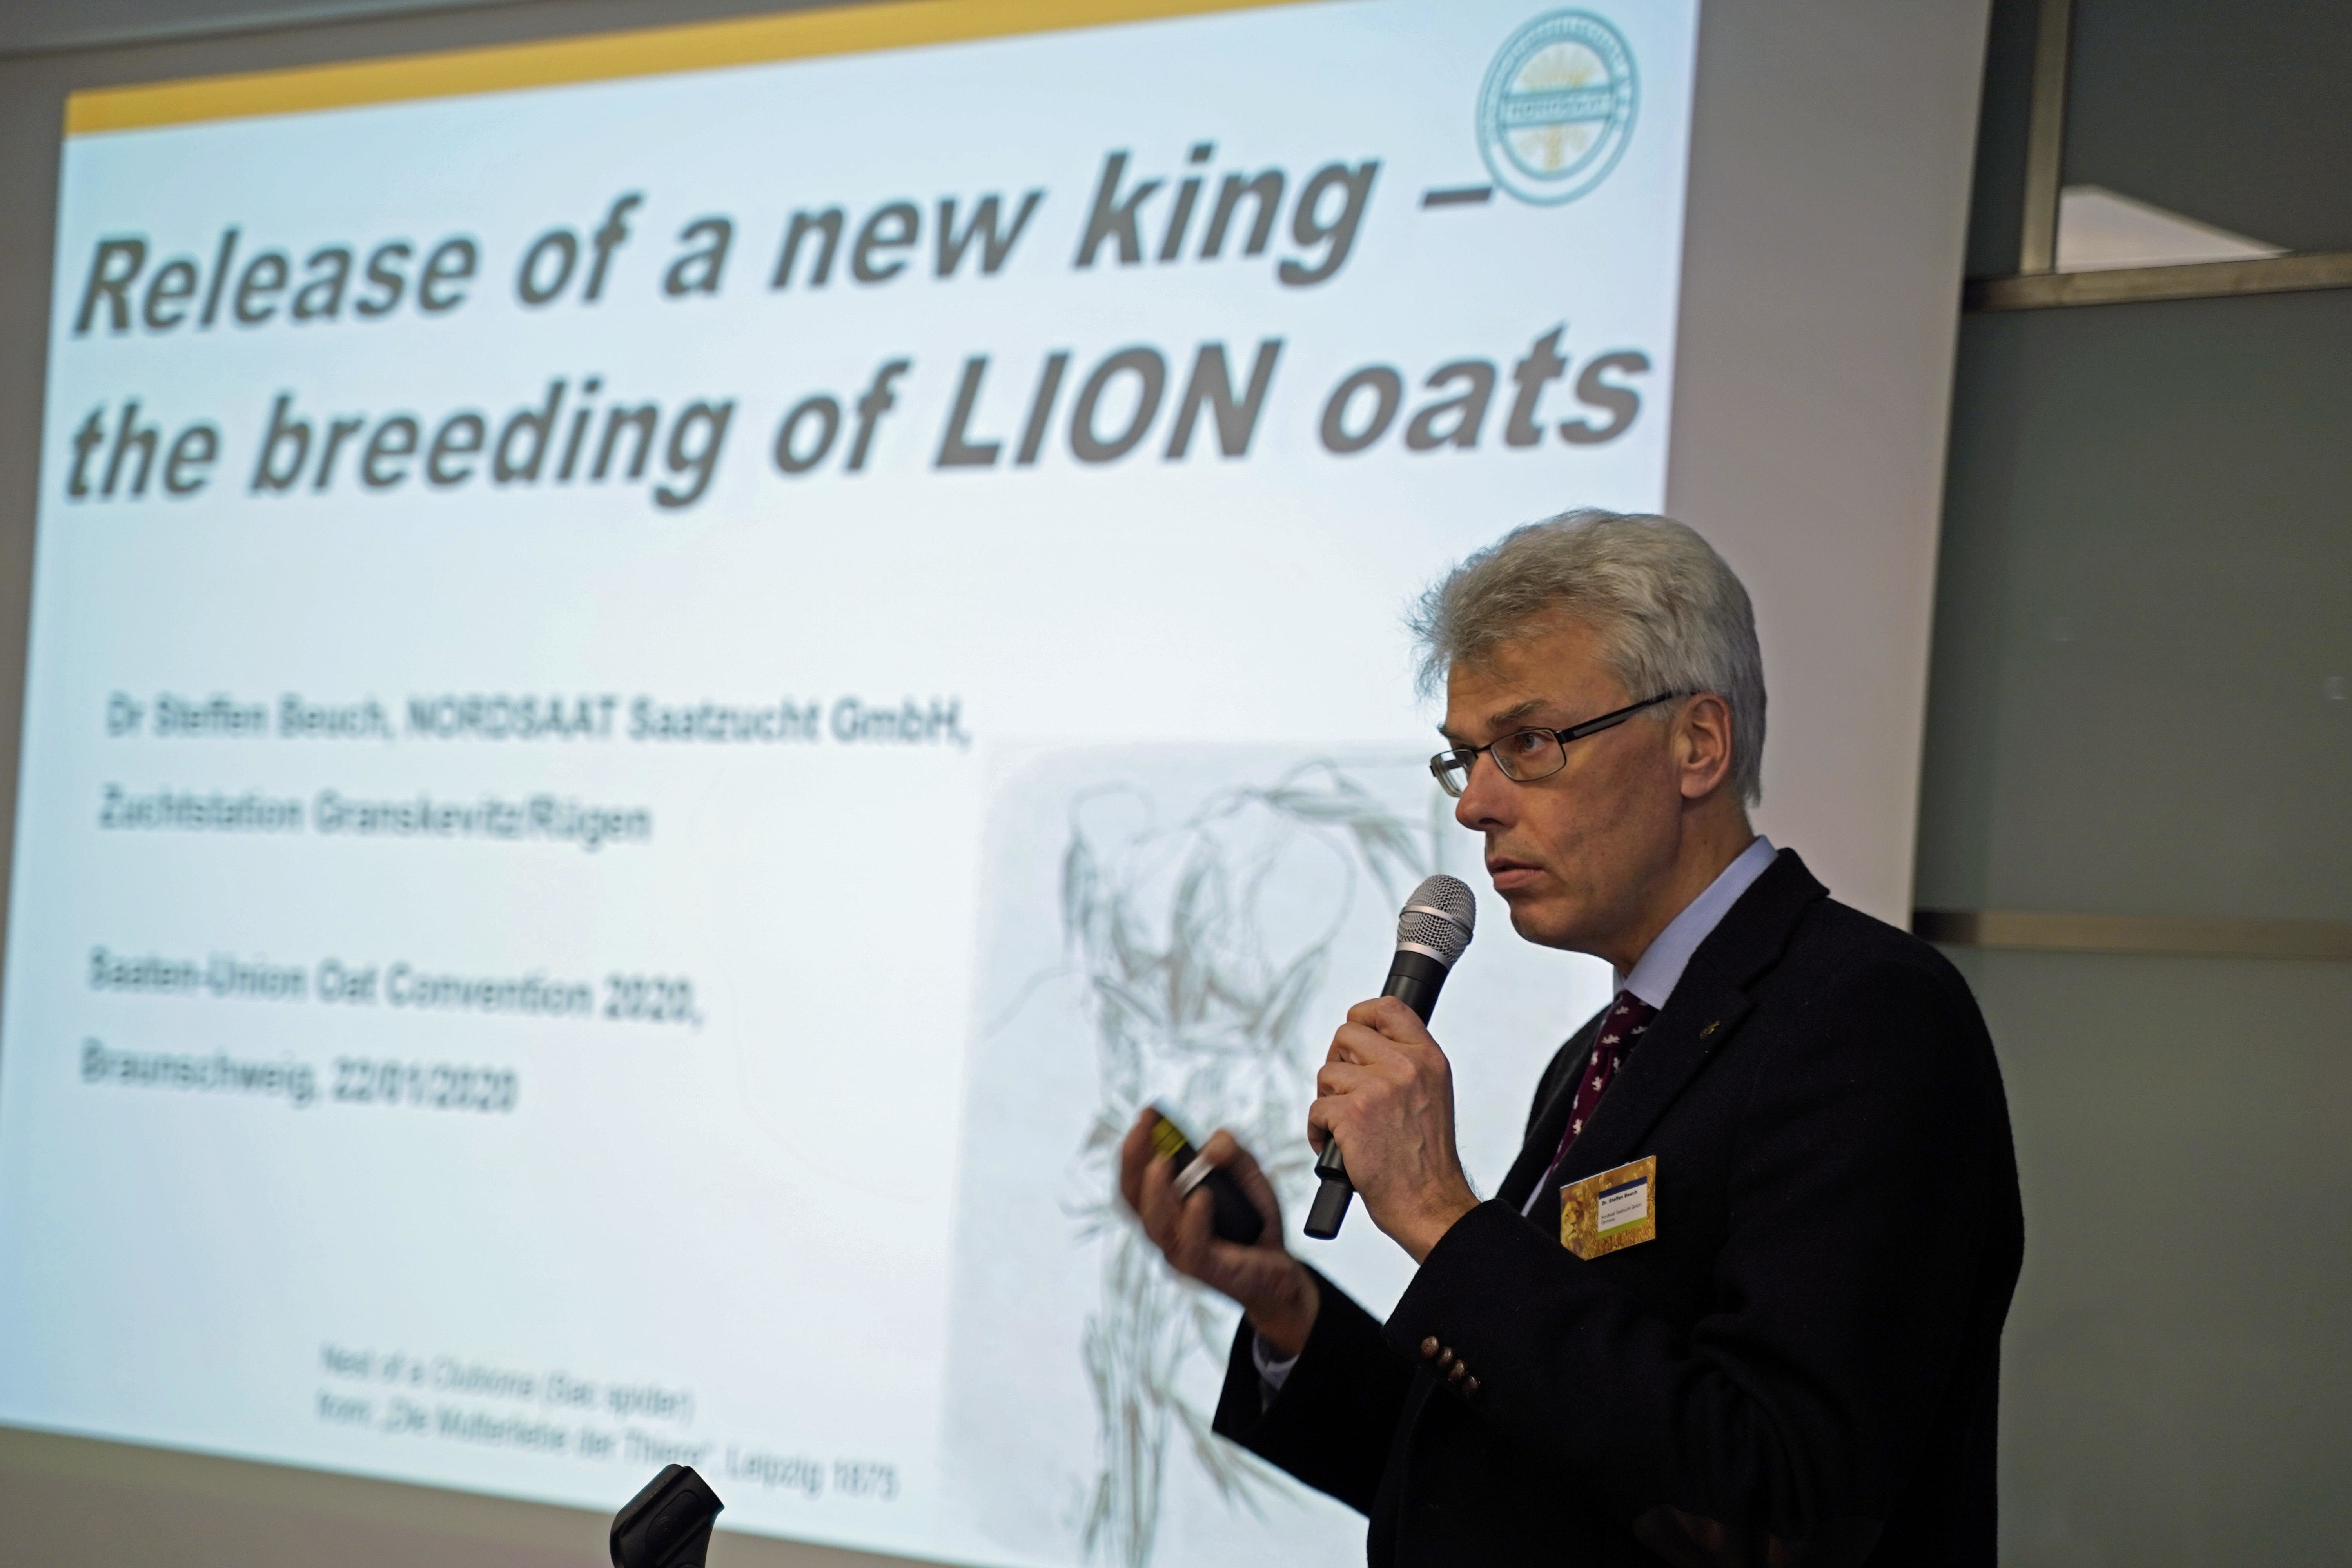 Dr. Steffen Beuch with the new oat variety LION